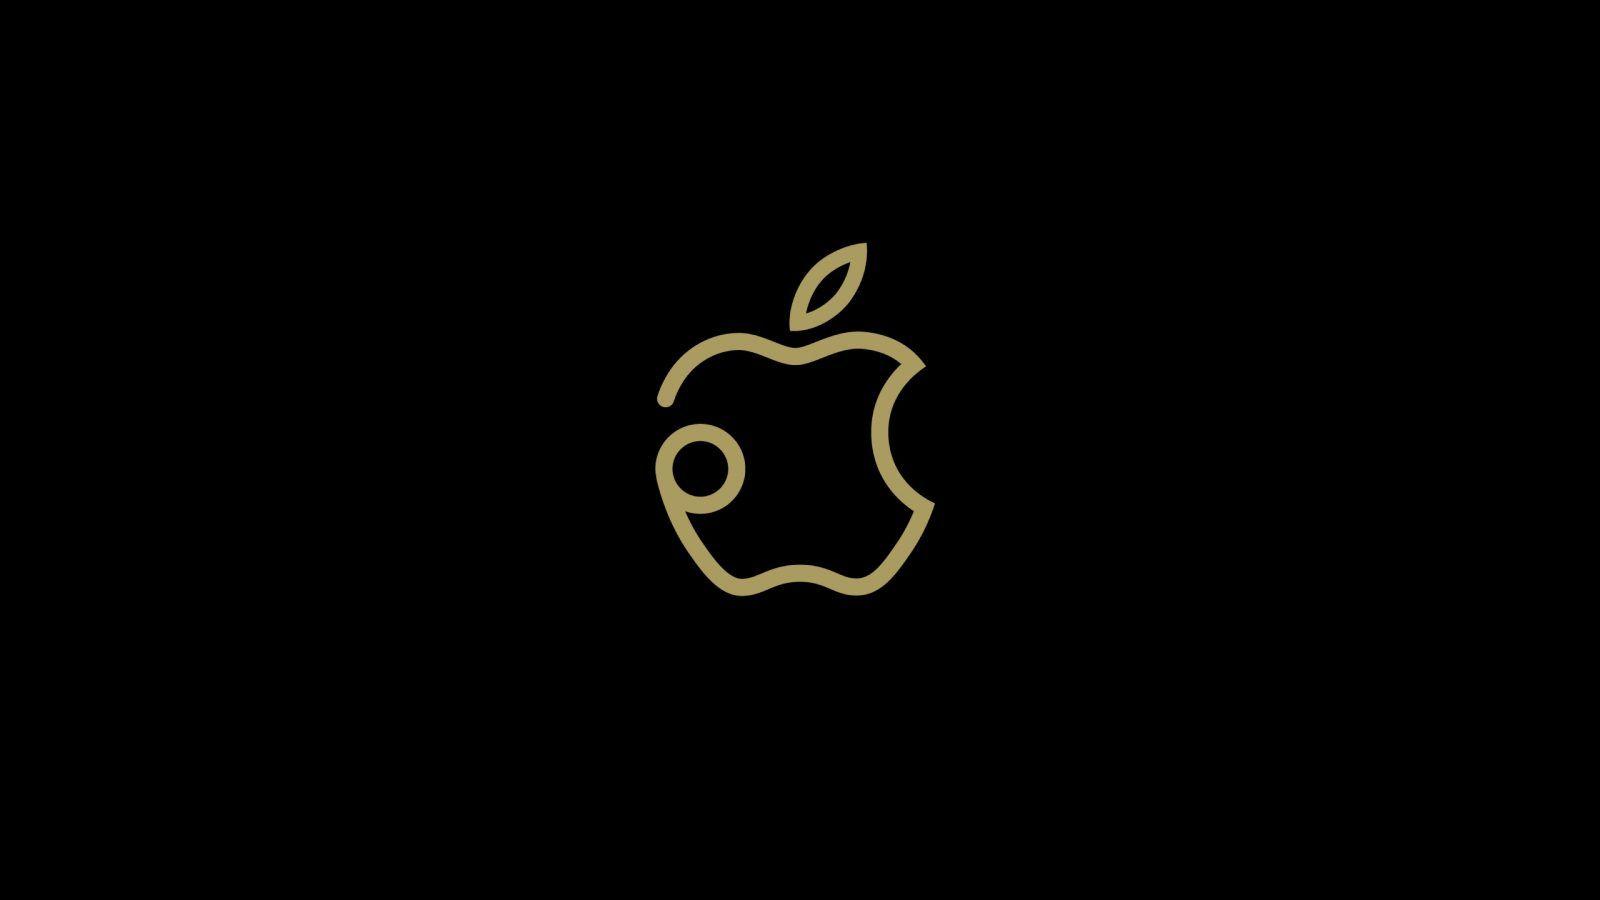 MacStore Logo - Apple's first store in Bangkok opening at Iconiam on November 10th